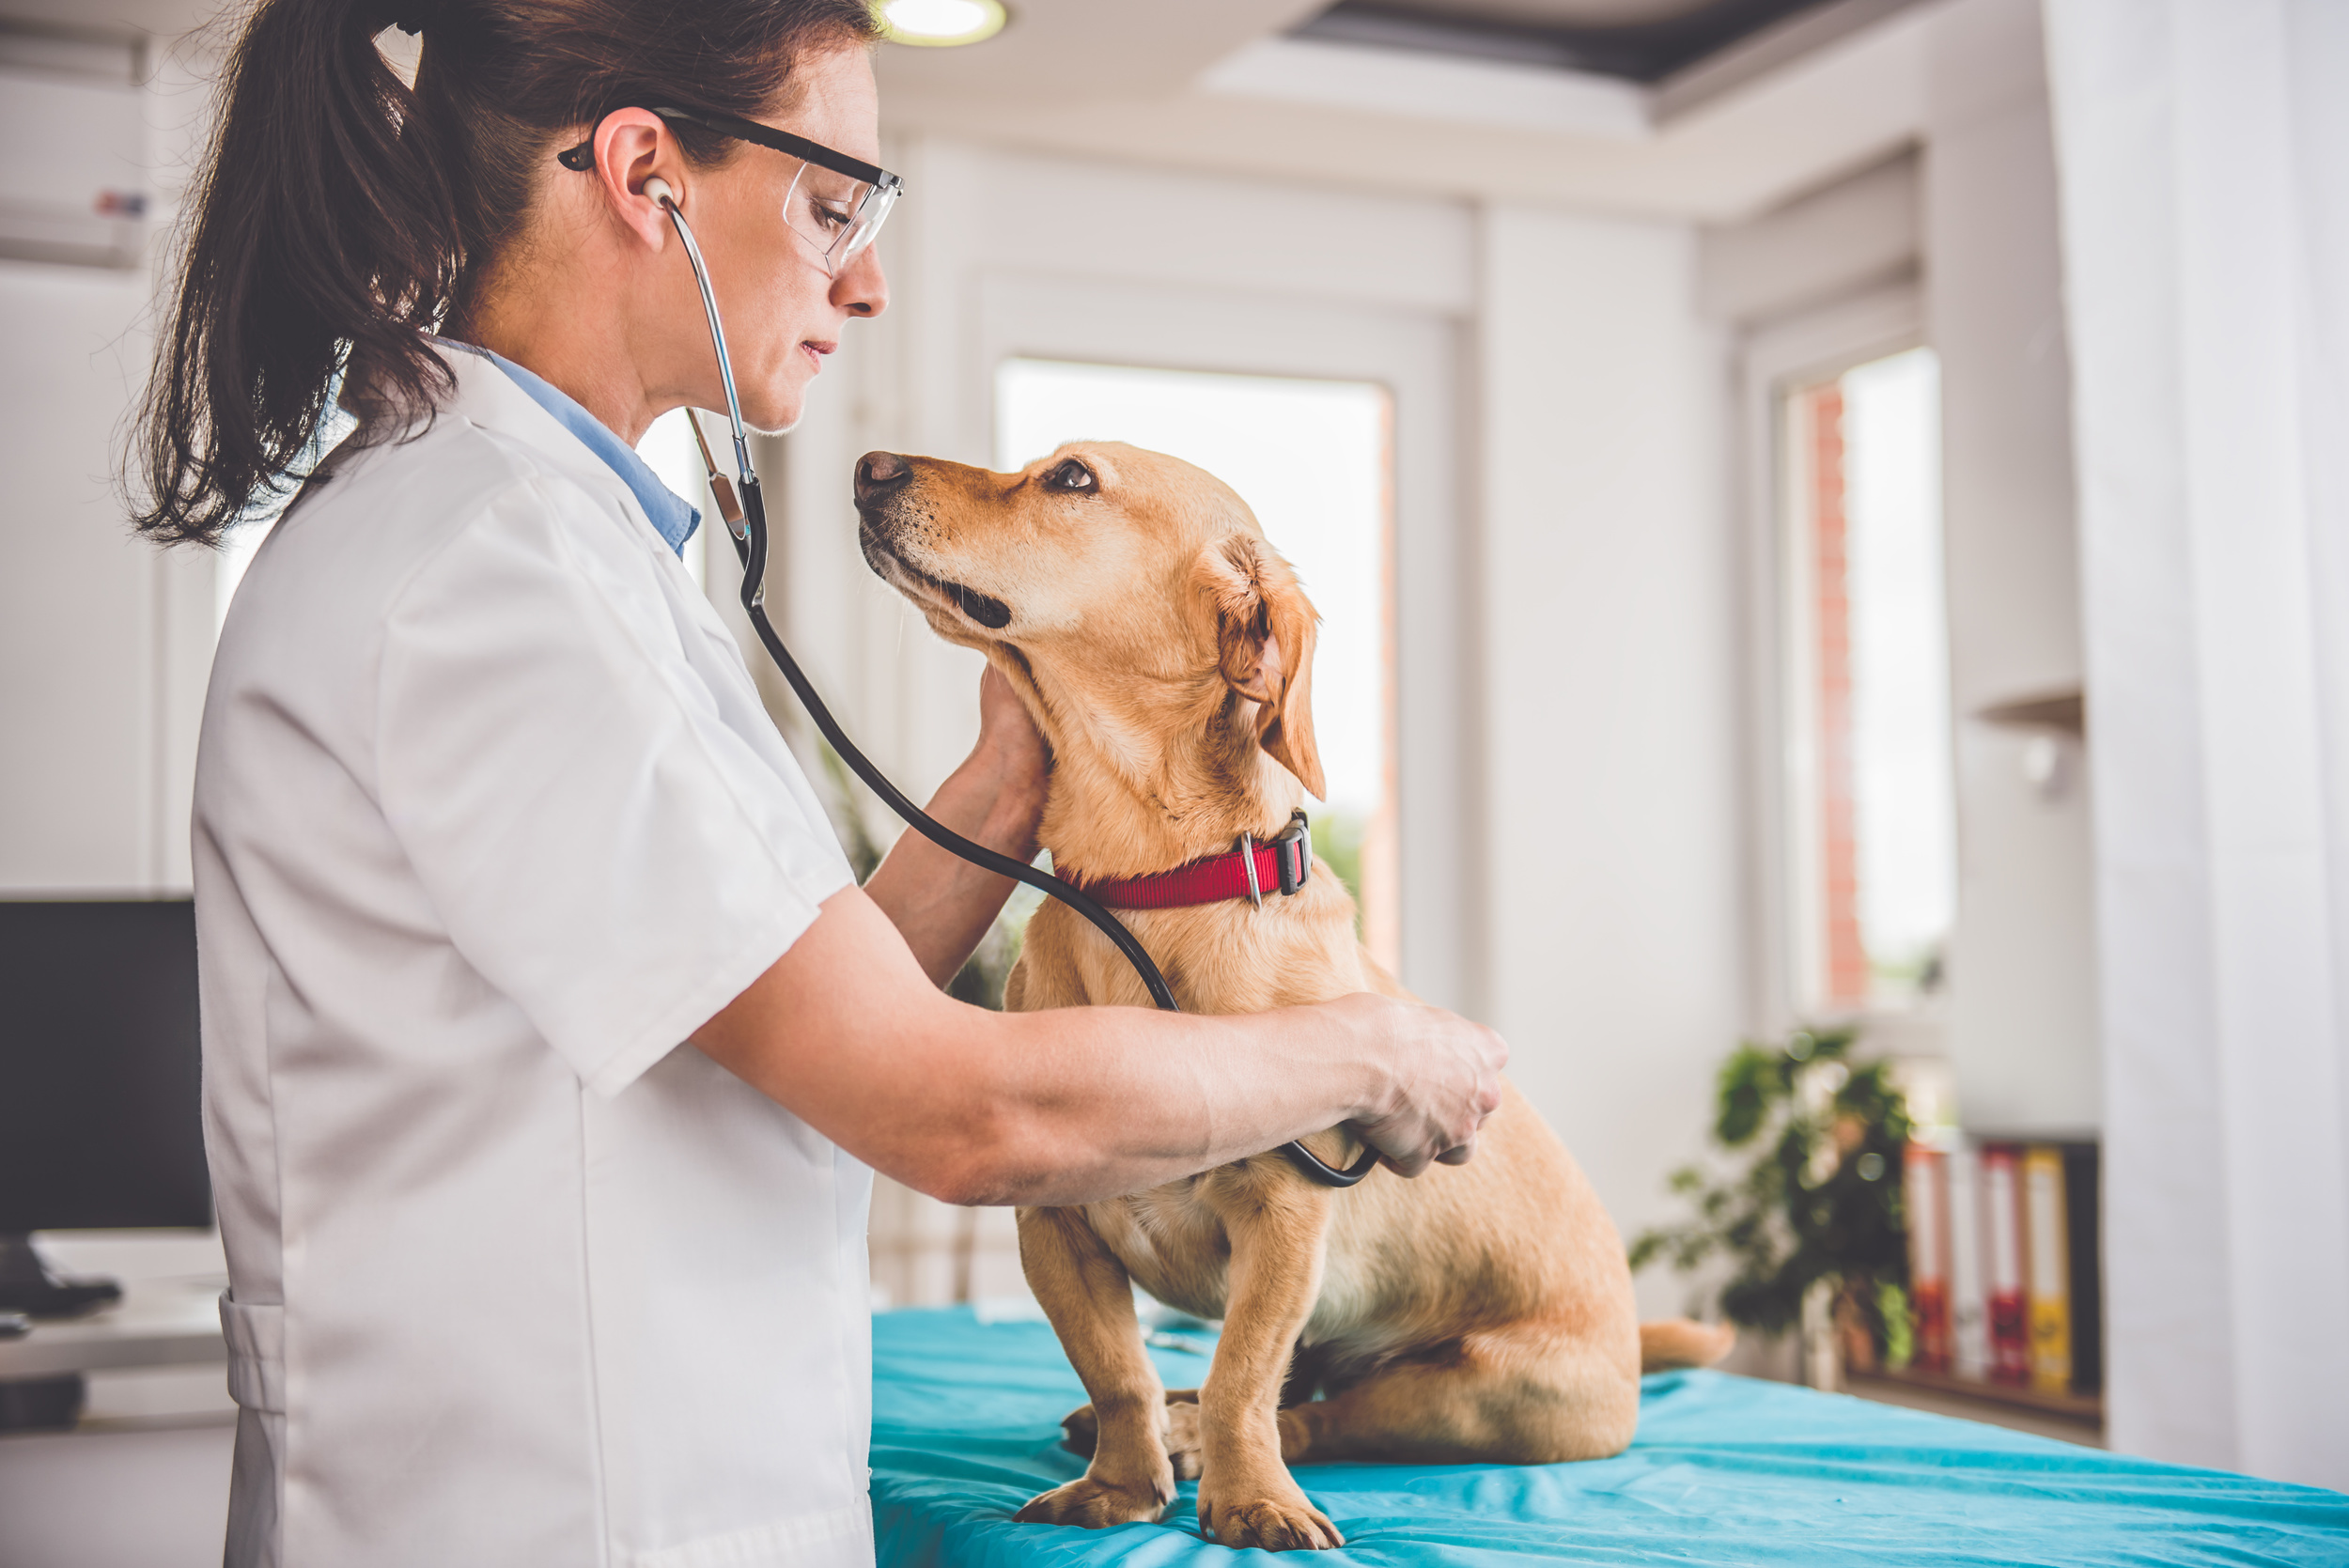 <p>Whether you adopted a pet or purchased through a private breeder, a trip to the vet to check on your puppy or kitten's health is a must. At this visit, you can get a full check-up and any vaccinations that a young pet needs to be healthy. </p>